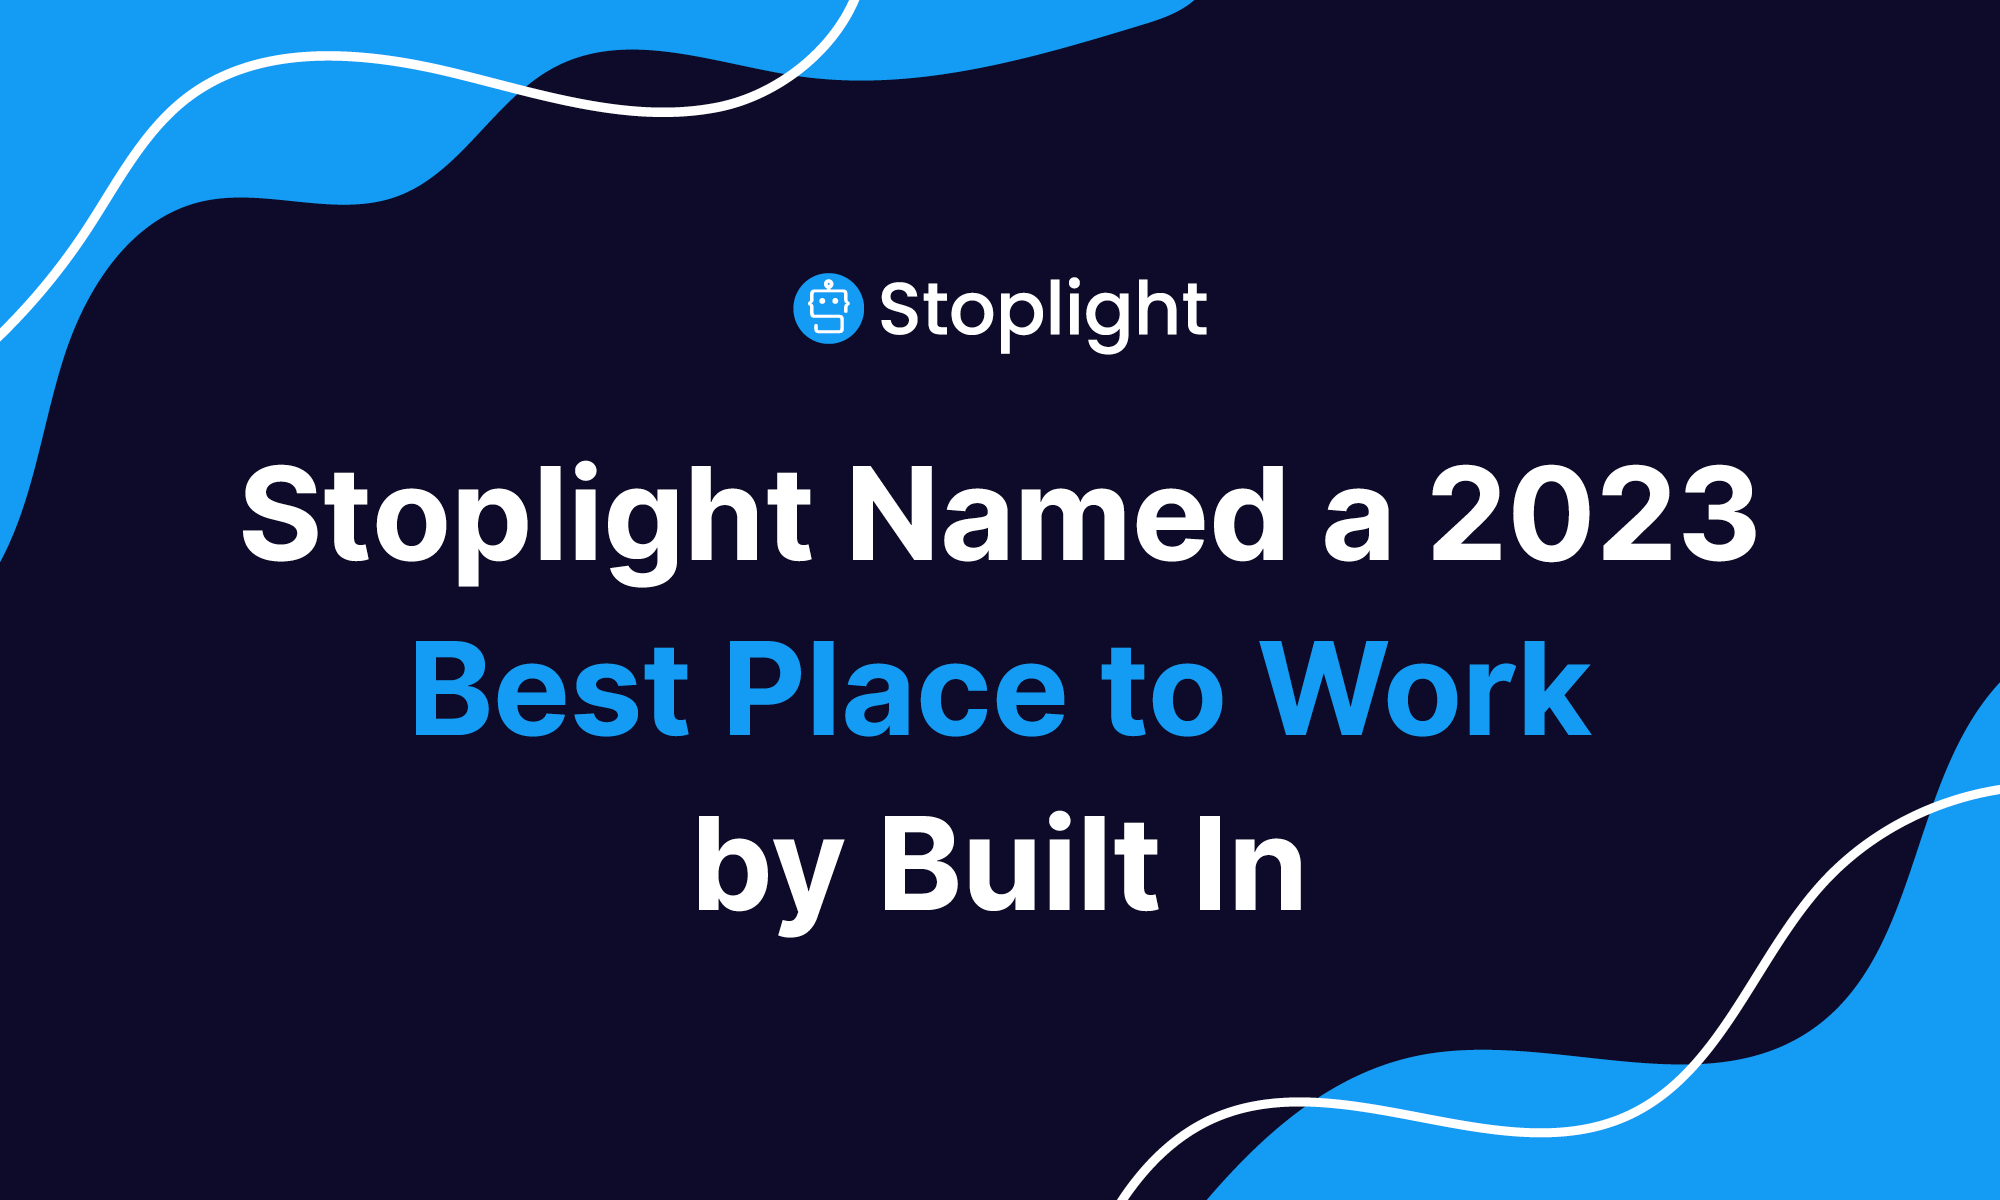 Stoplight Named a 2023 Best Place to Work by Built In